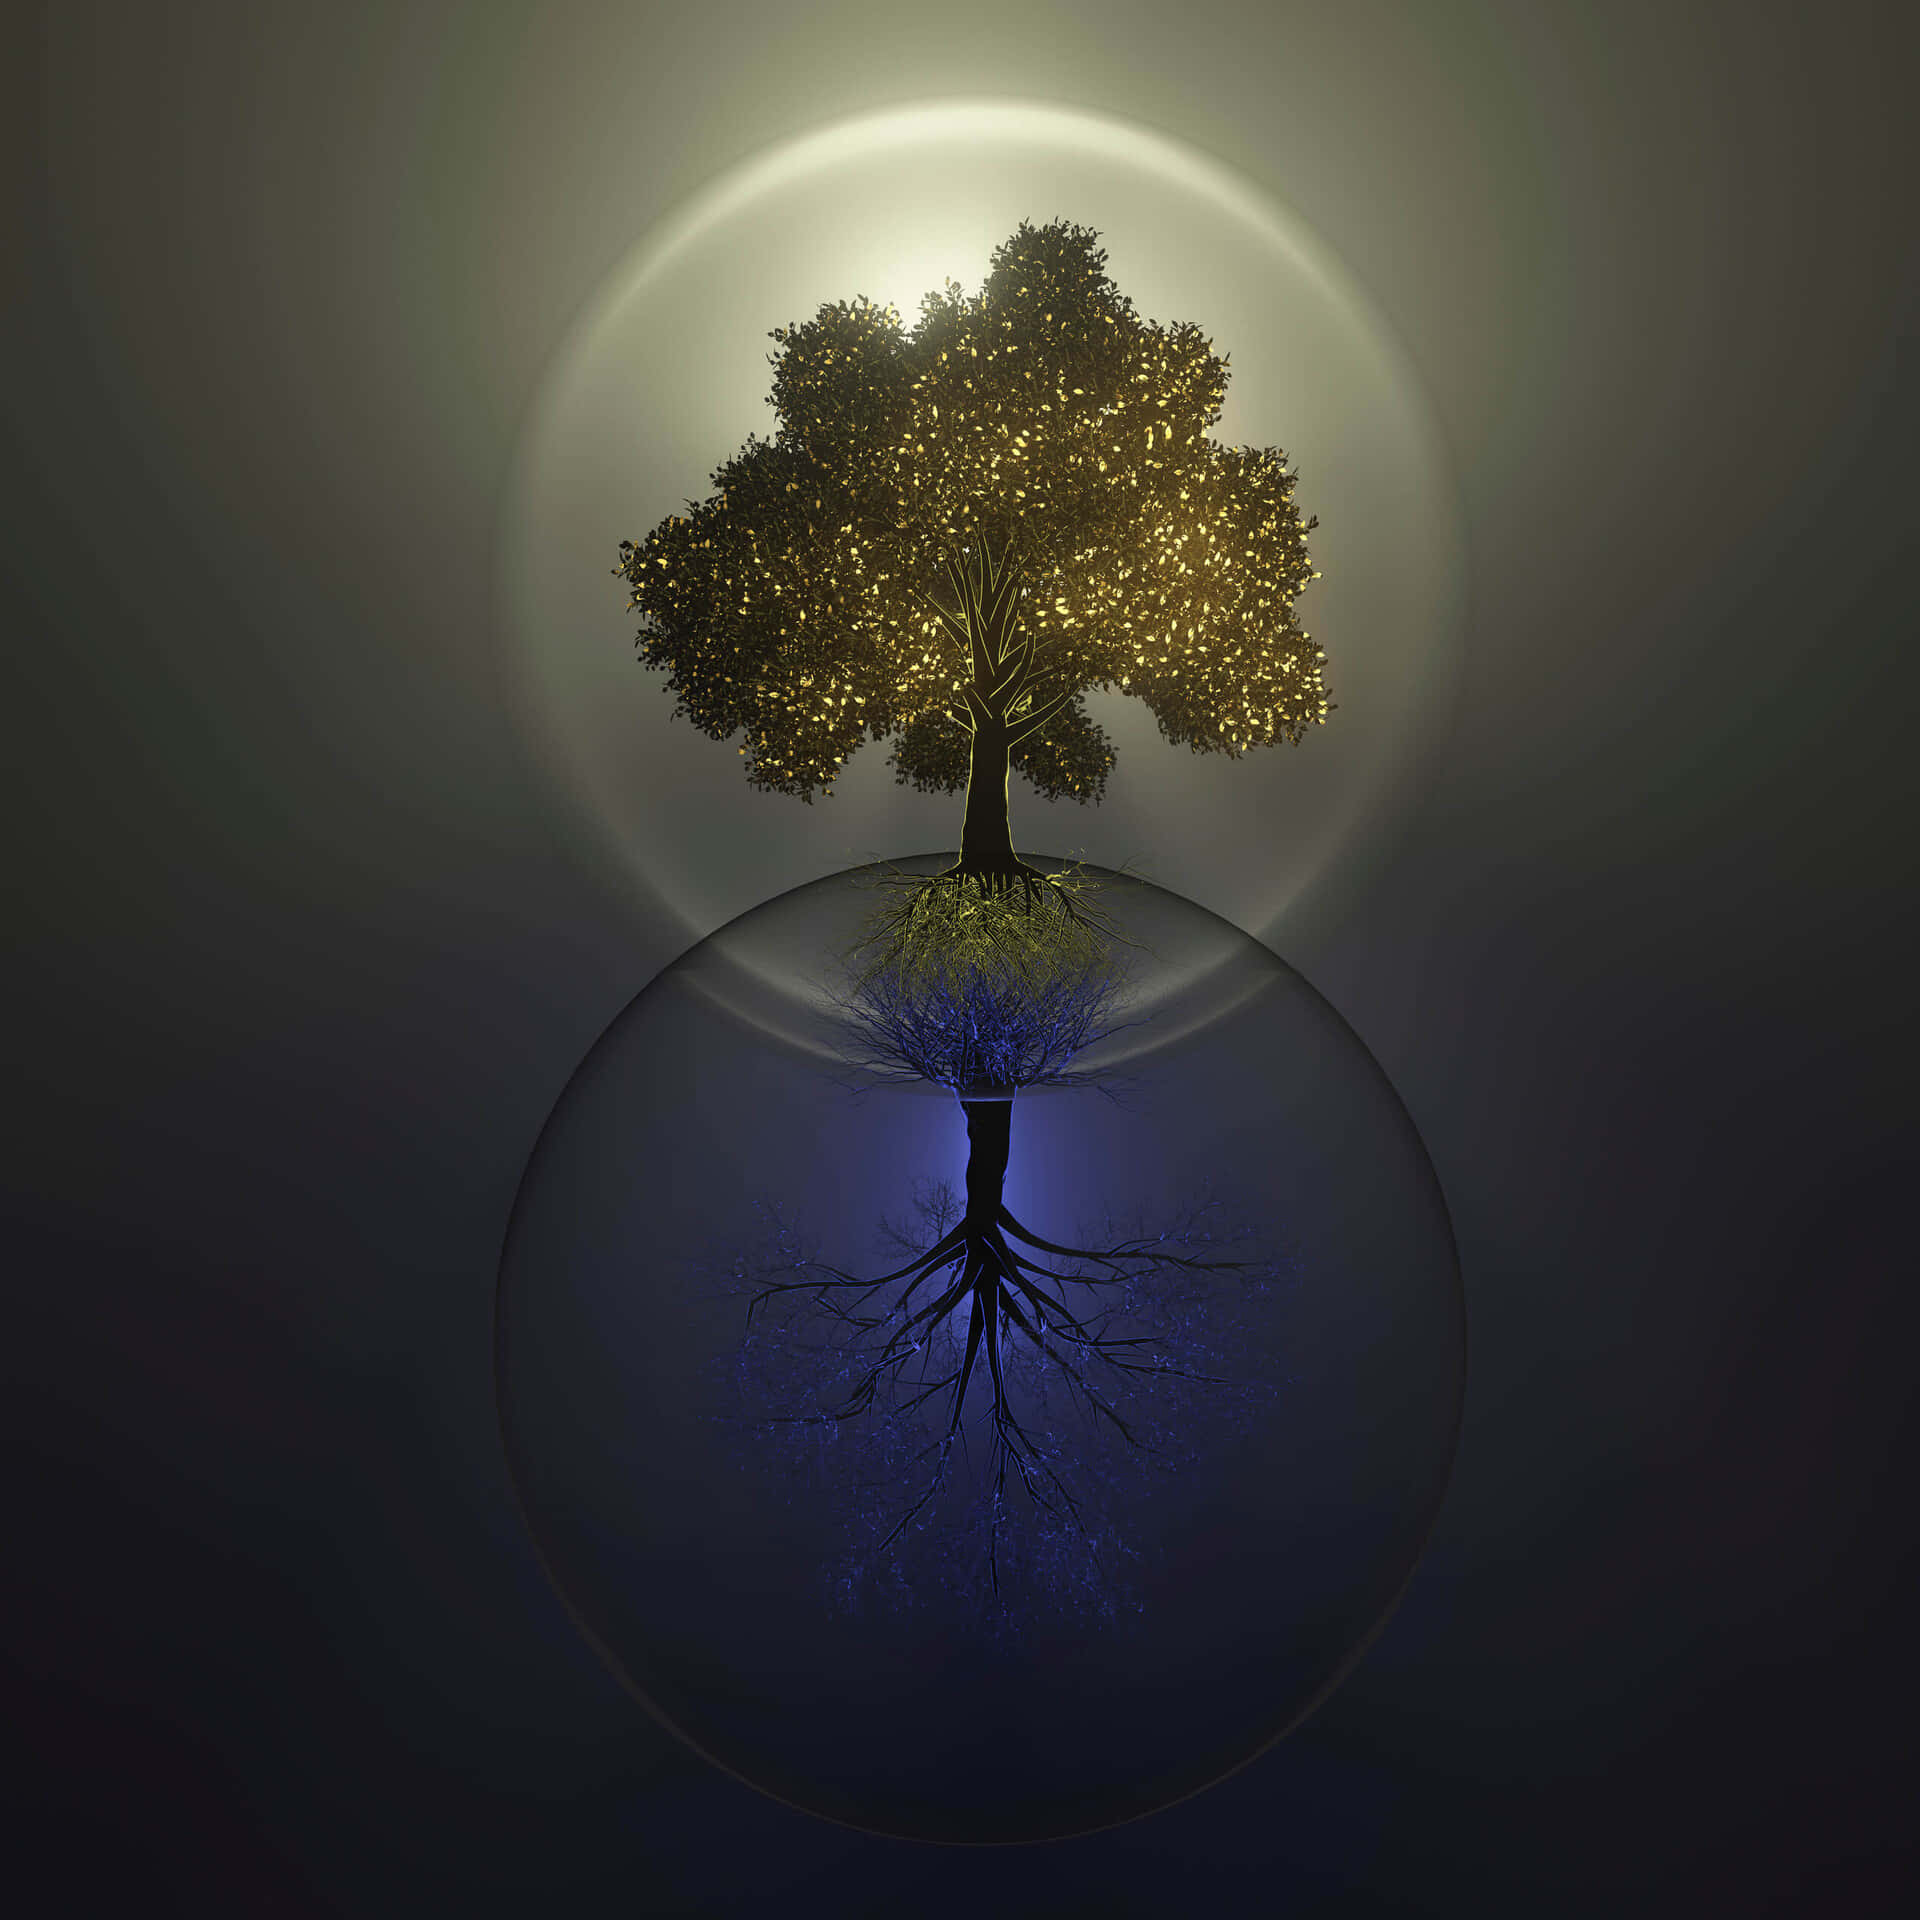 Tree Of Life With Reflected Image Wallpaper